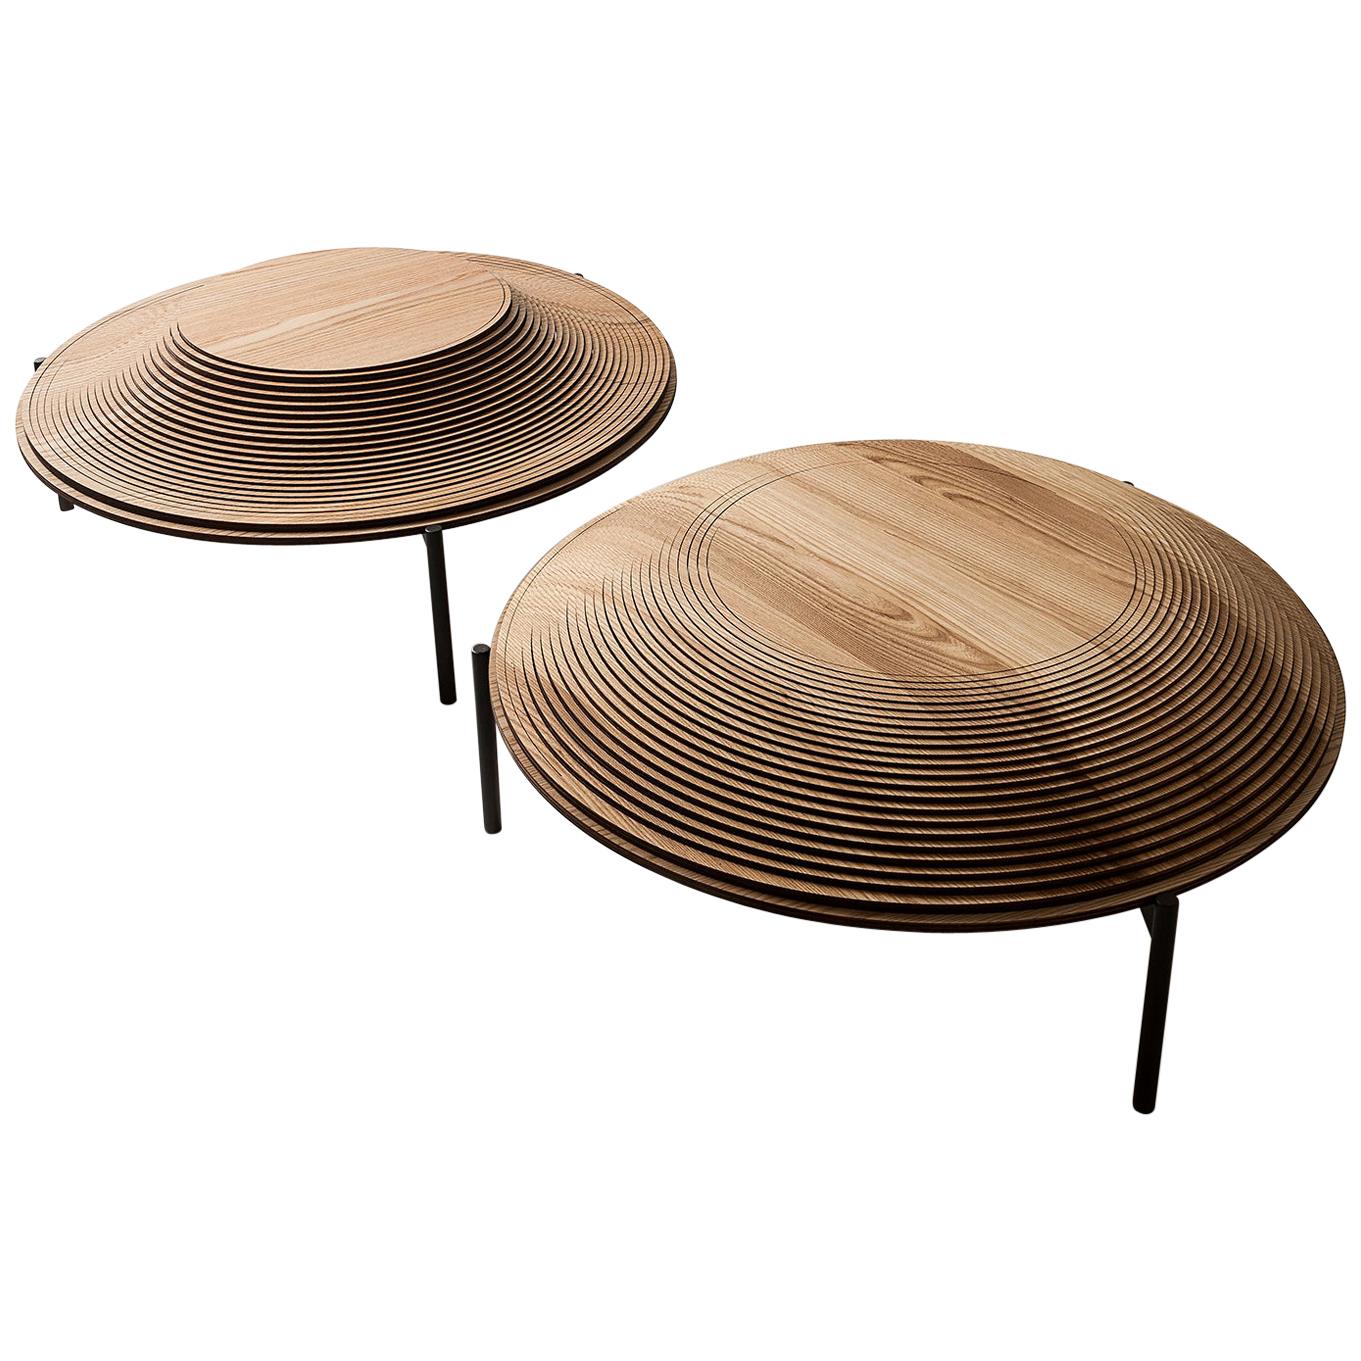 Modern Sculptural Wood Coffee Table "Dome 2 and 3" by Sebastiano Bottos, Italy For Sale